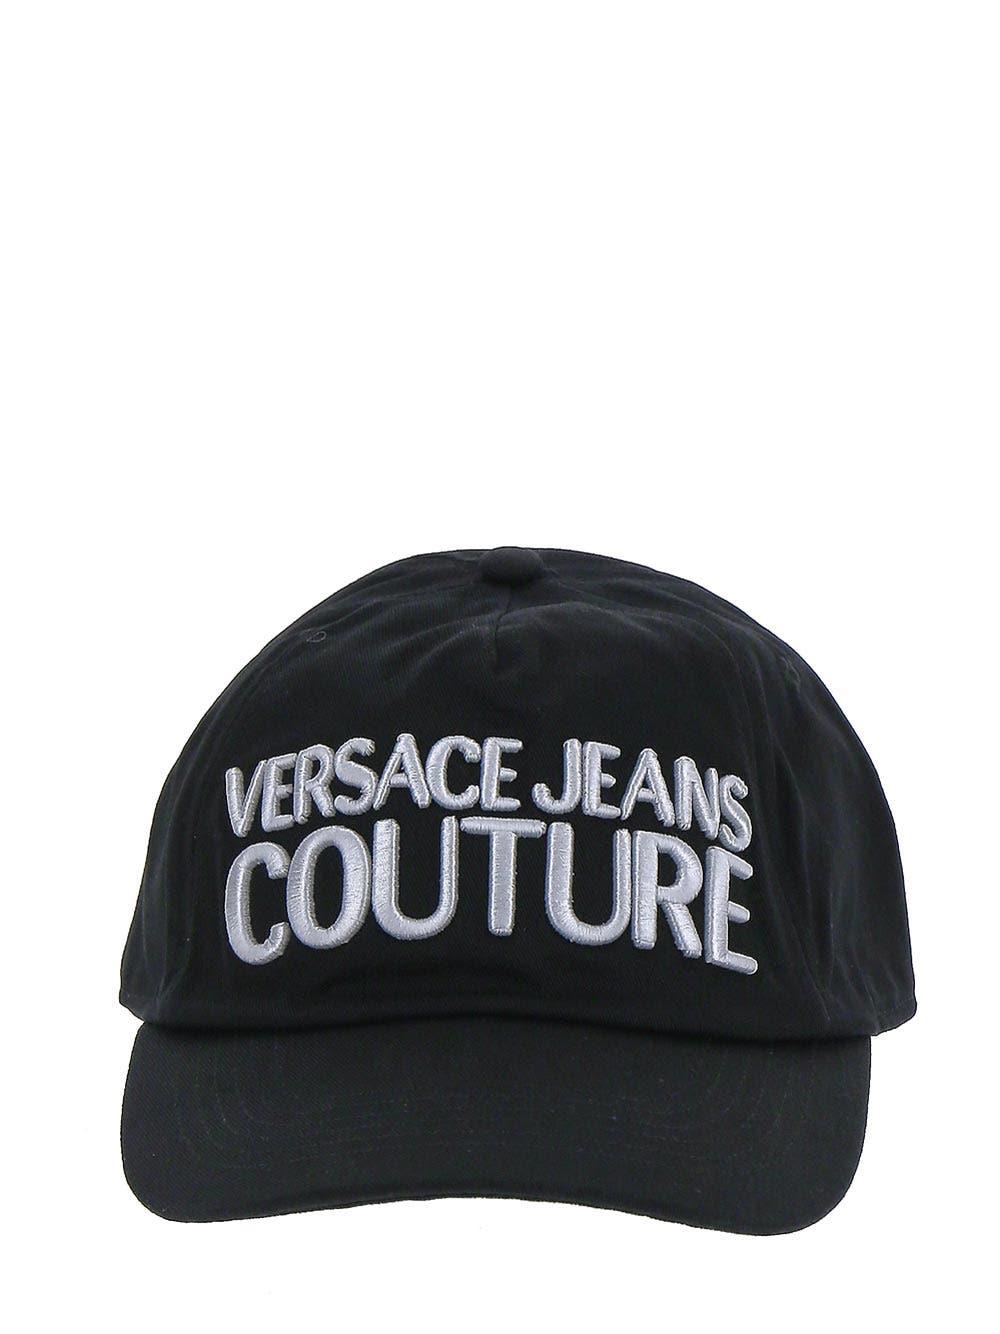 Versace Jeans Couture Baseball Cap With Pences